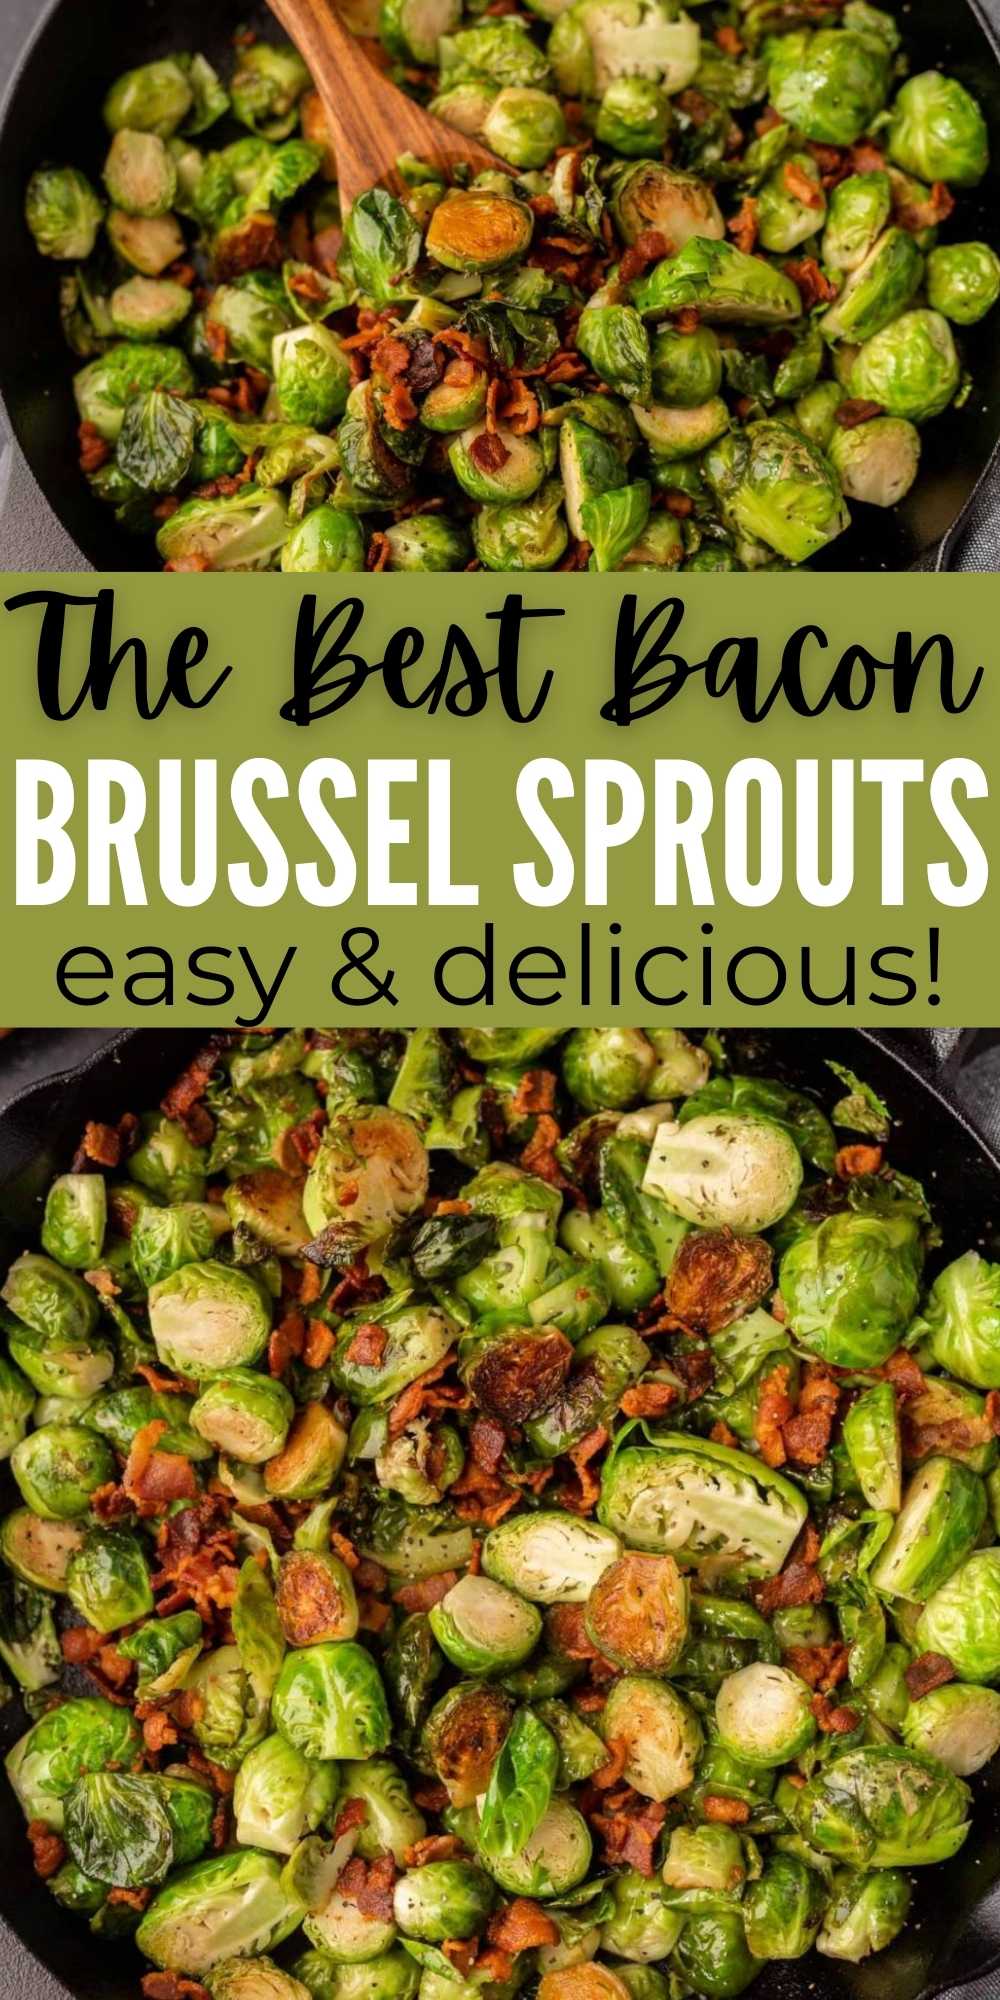 Bacon Brussel Sprouts is an easy side dish made with only a few ingredients. Take your brussel sprouts to the next level by adding bacon. Sauteed Bacon Brussel Sprouts is a delicious side dish. #eatingonadime #baconbrusselsprouts #roastedvegetables